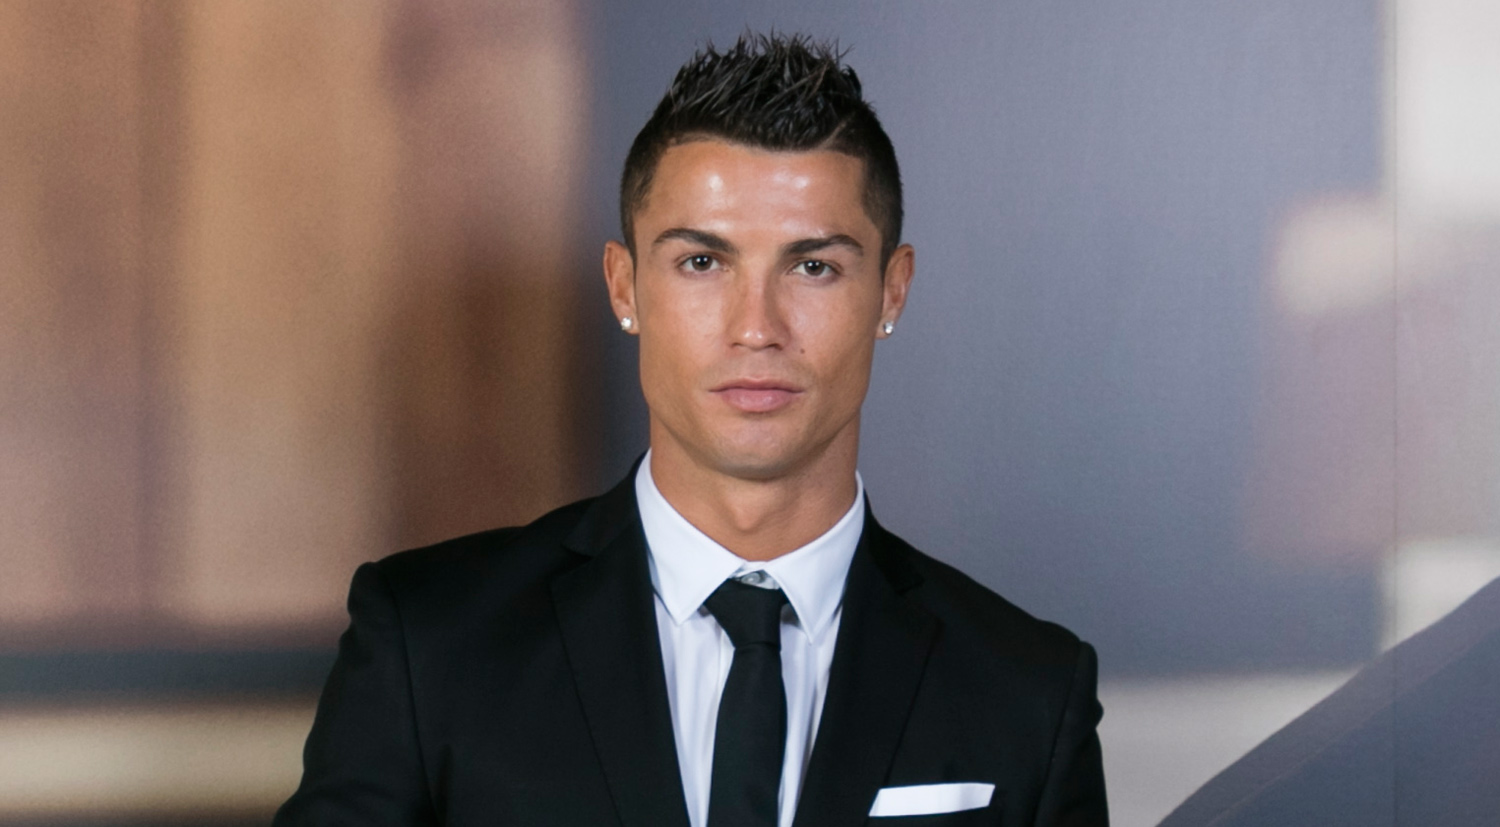 When Will You Meet Your Soulmate? ❤️ Rate a Bunch of Male Celebrities to Find Out cristiano ronaldo